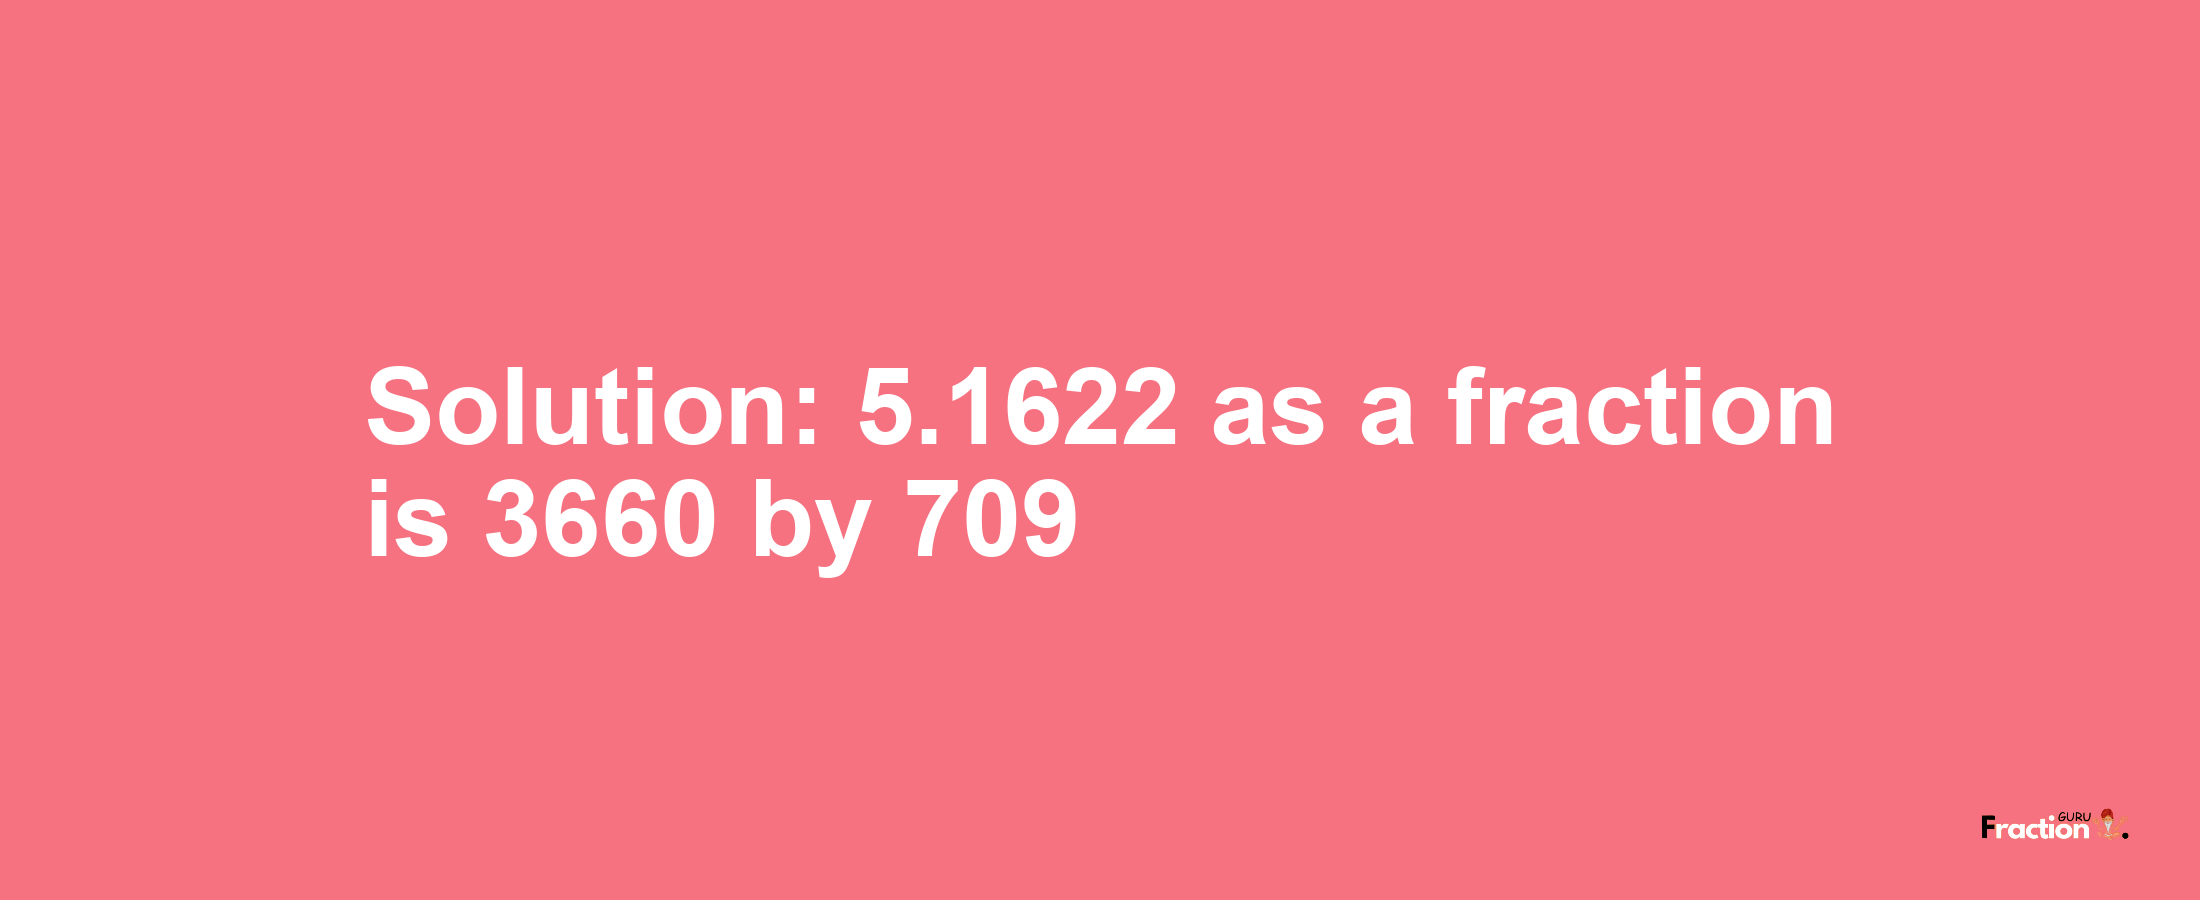 Solution:5.1622 as a fraction is 3660/709